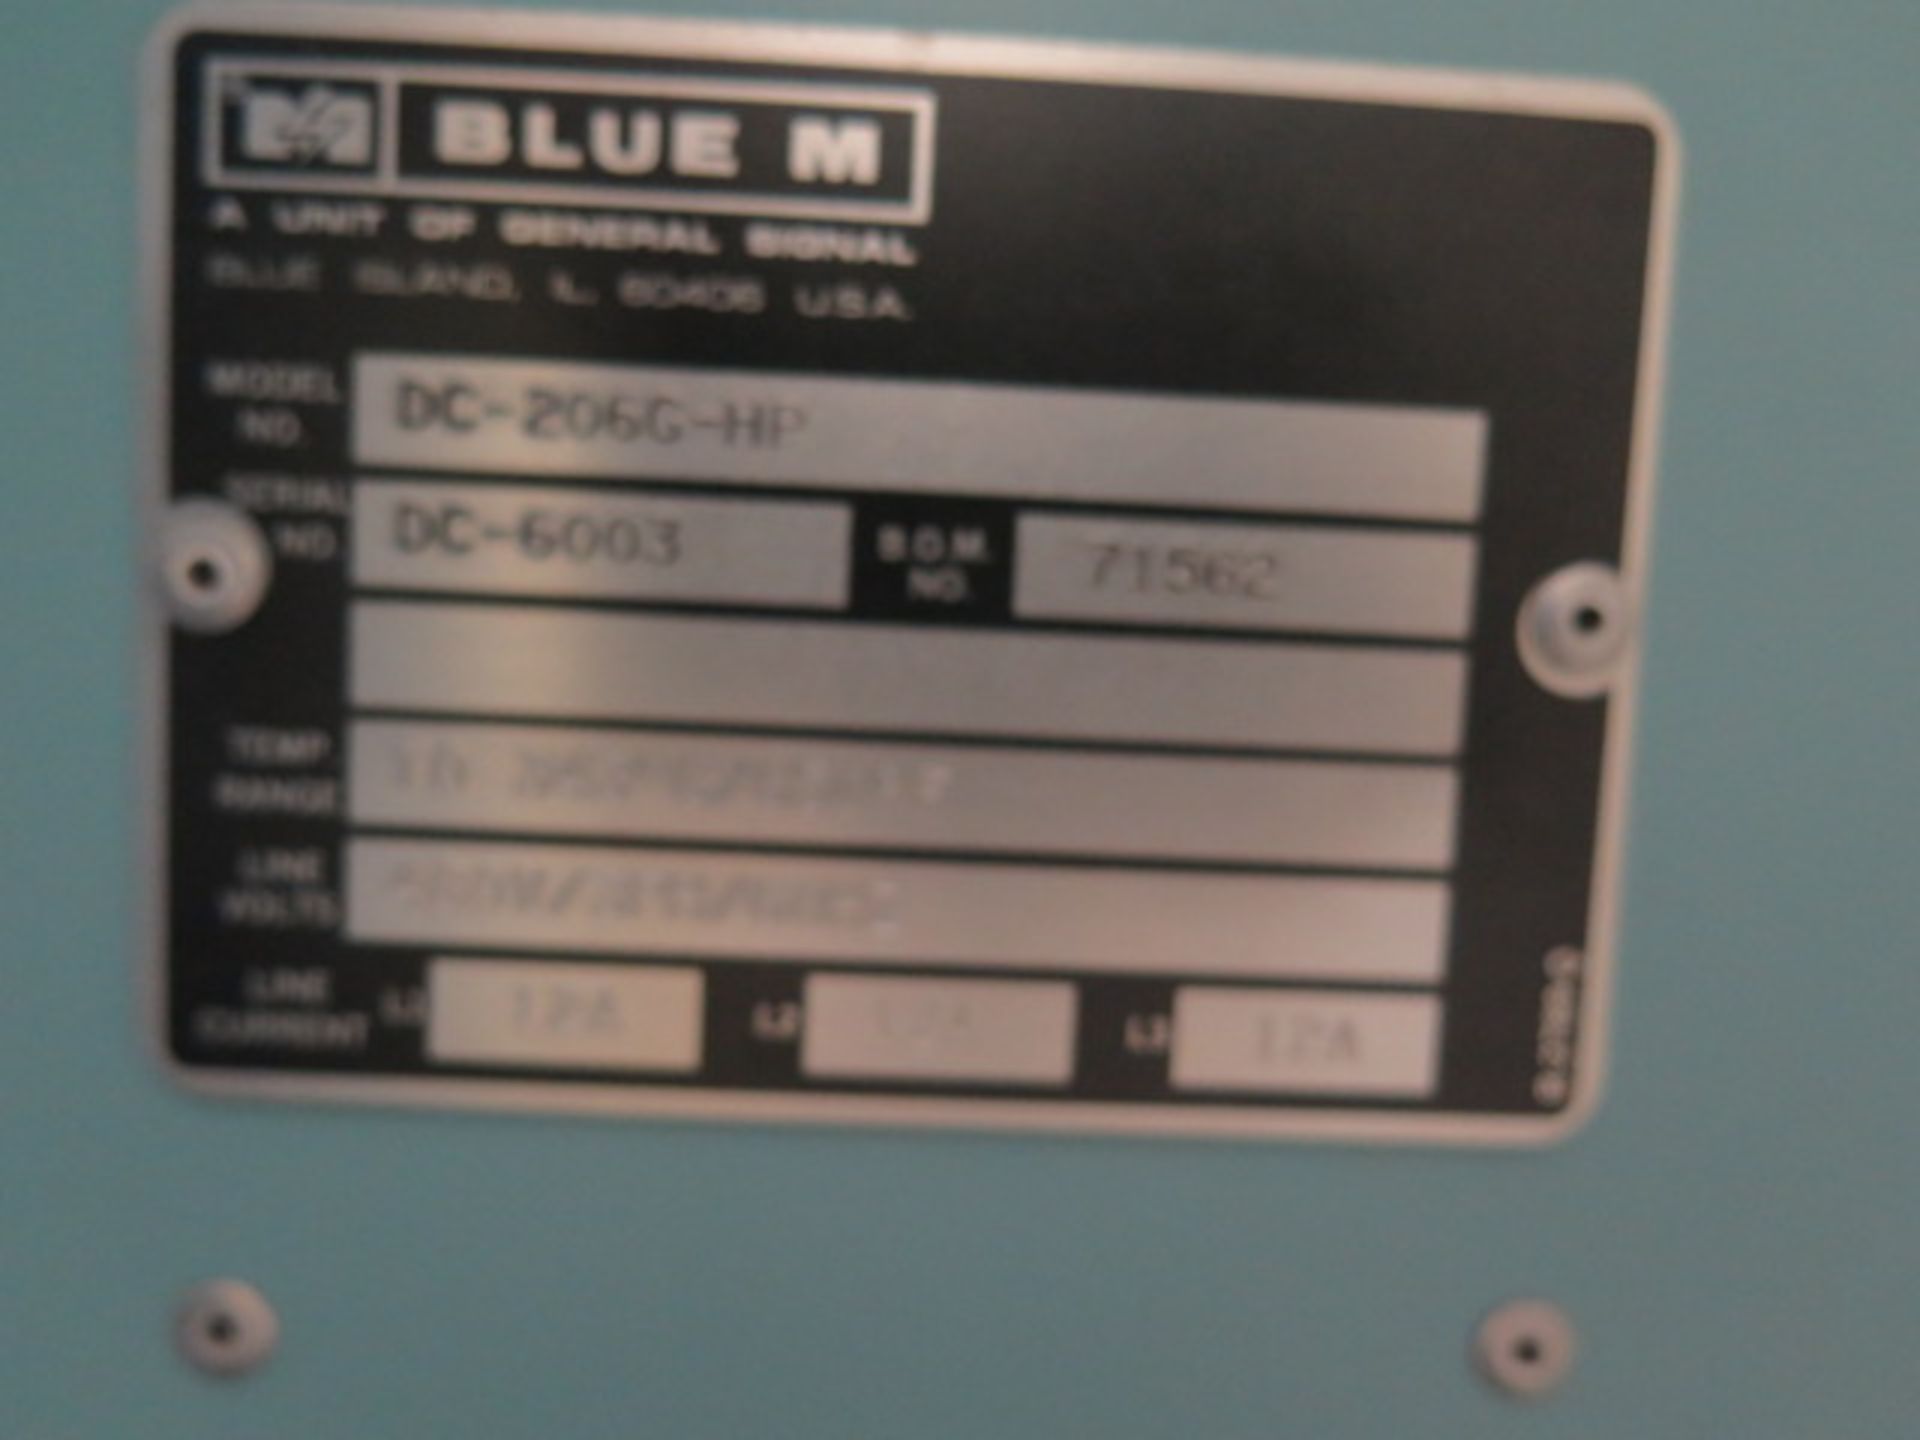 BlueM qsmdl. DC-206G-HP 343 Deg C / 650 Deg F Oven s/n DC-6003 - Image 6 of 6